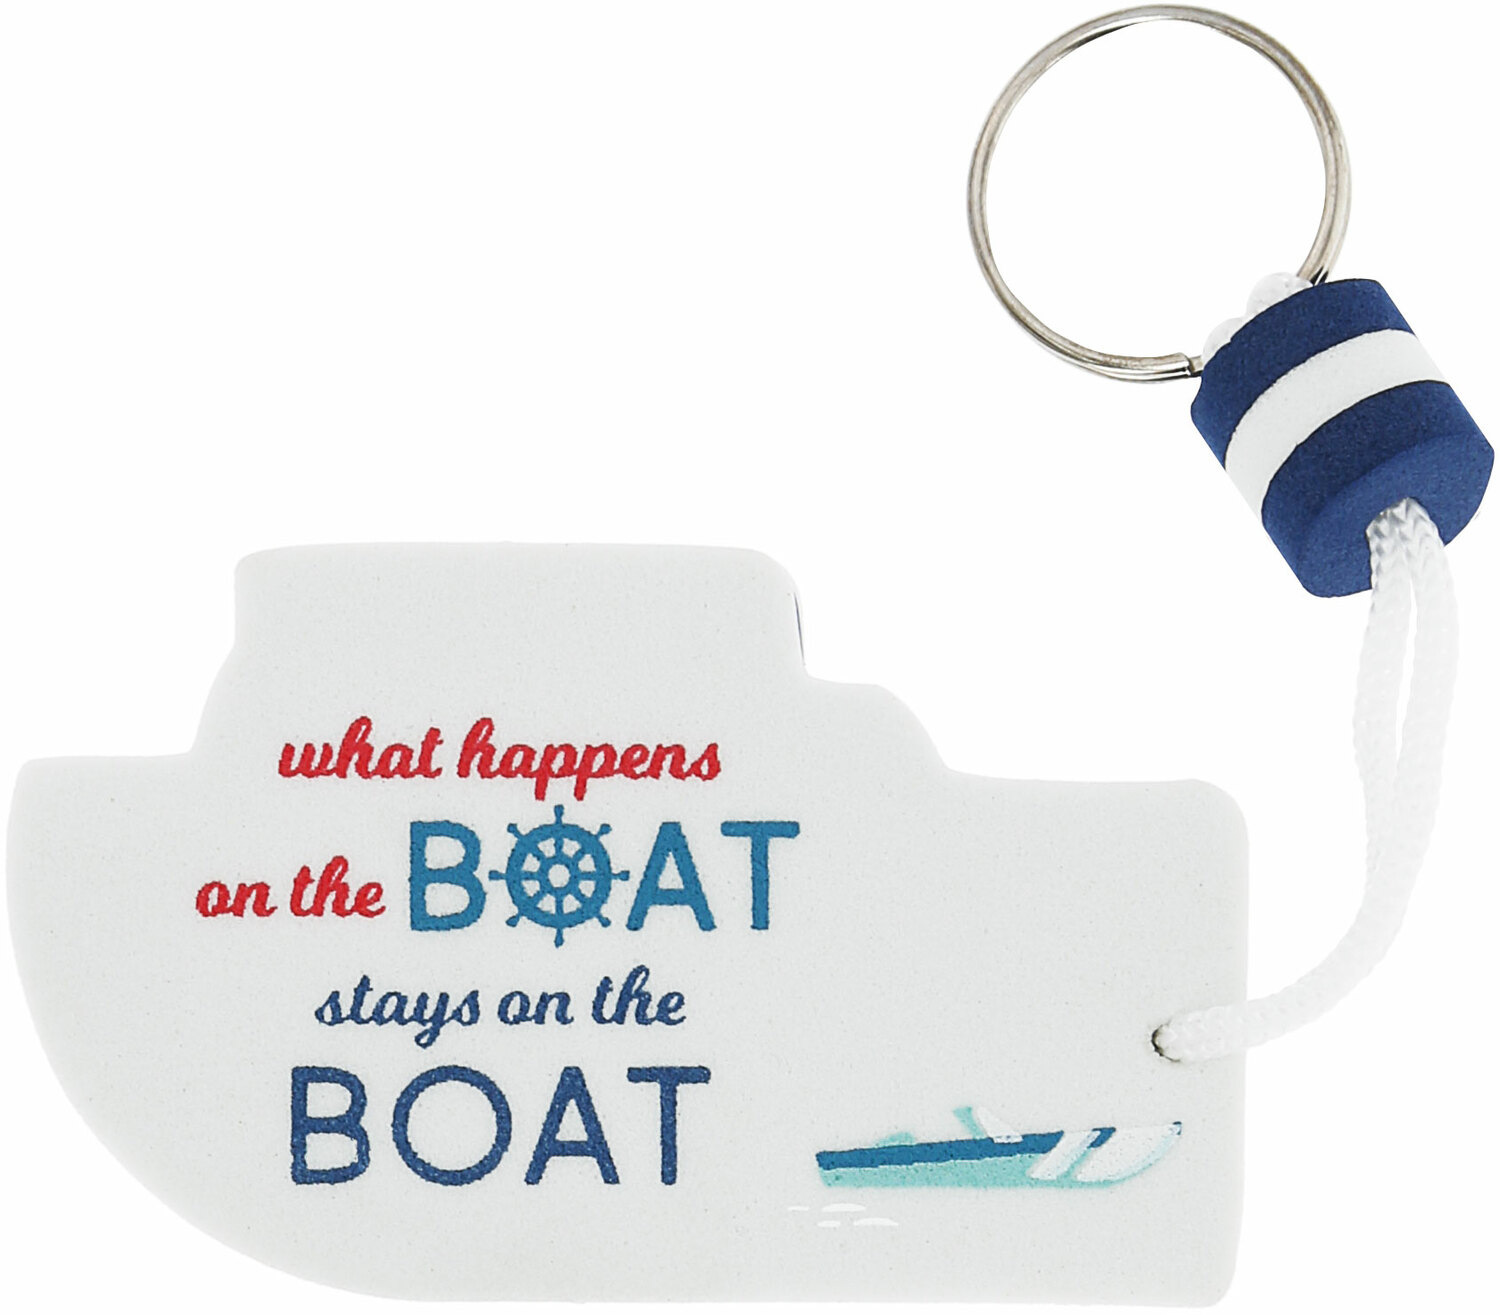 On The Boat by We People - On The Boat - Floating Key Chain